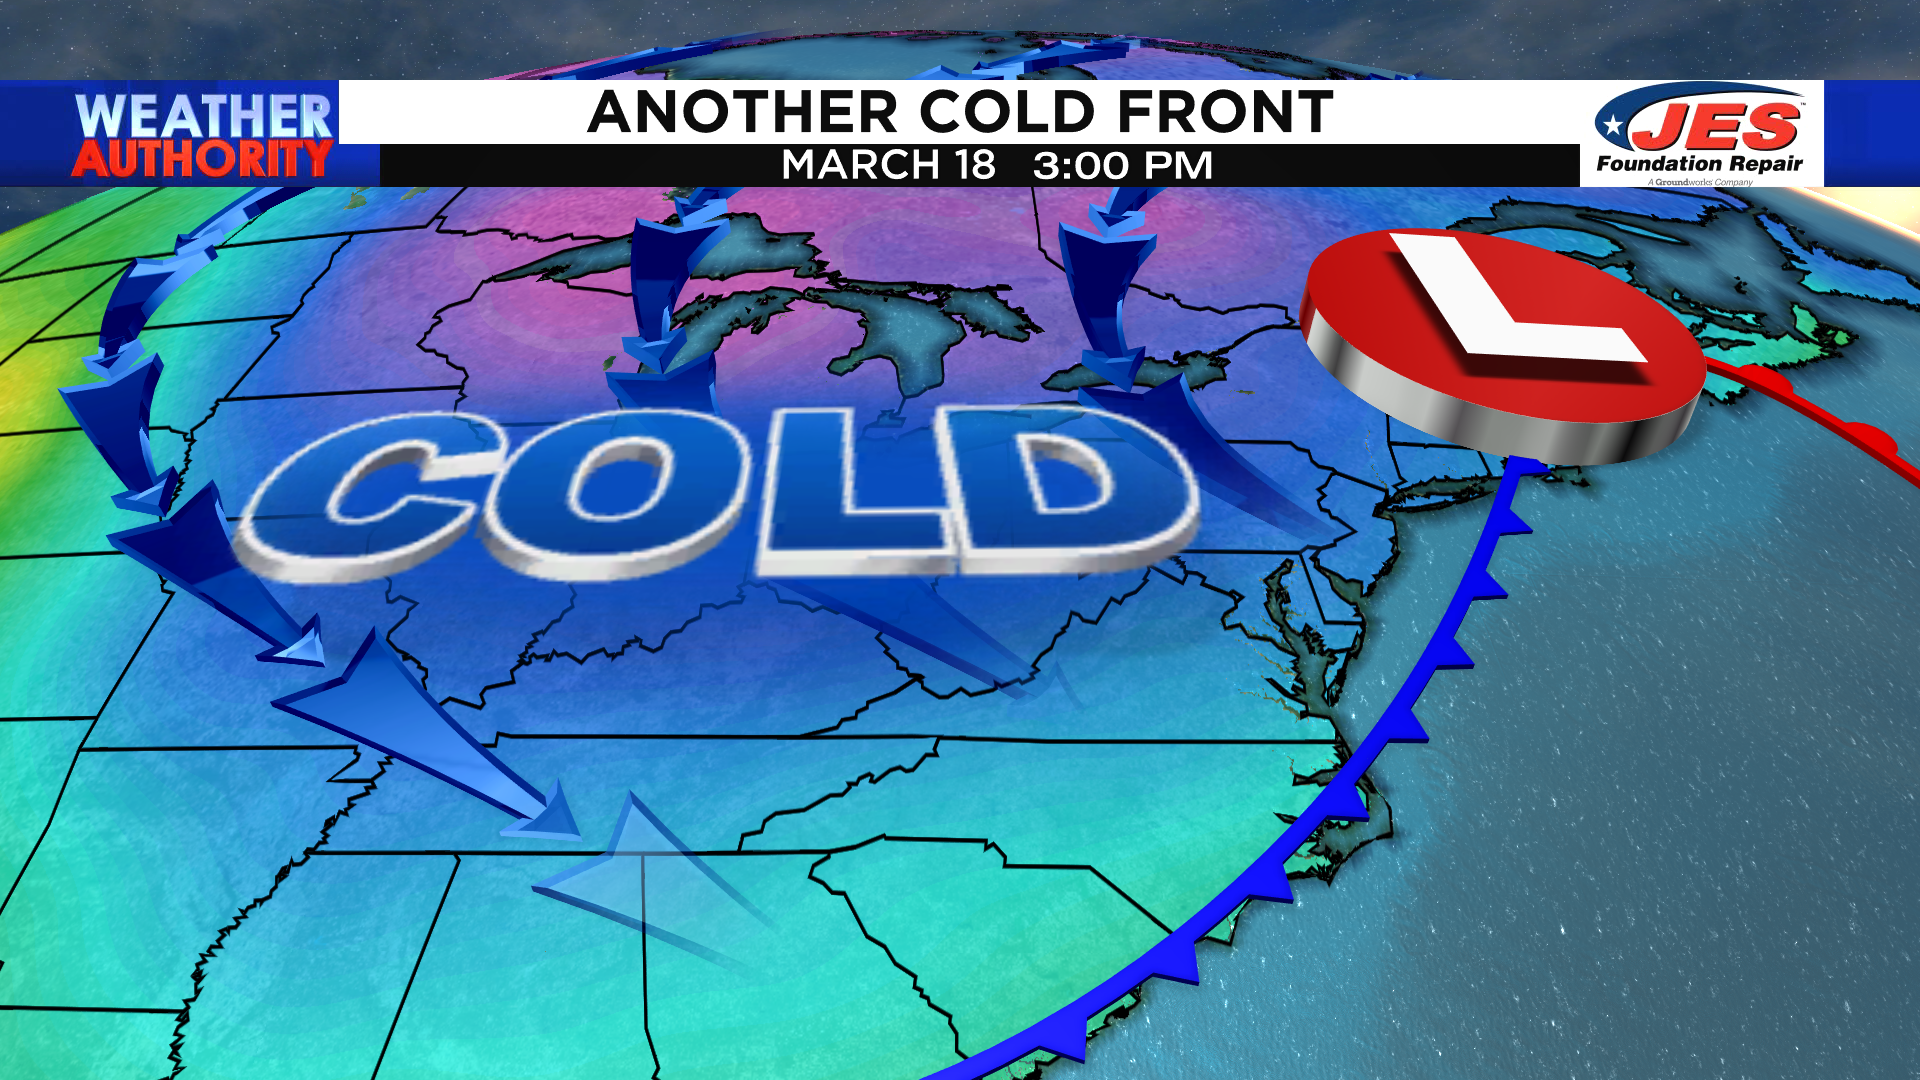 Looking Ahead: Another strong cold front to bring a wintry feel to